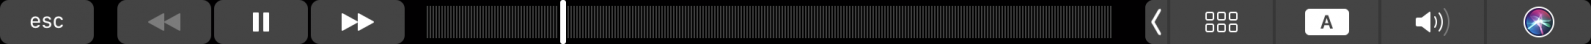 Touch Bar 스크린샷 2019-01-22 12.58.52.png